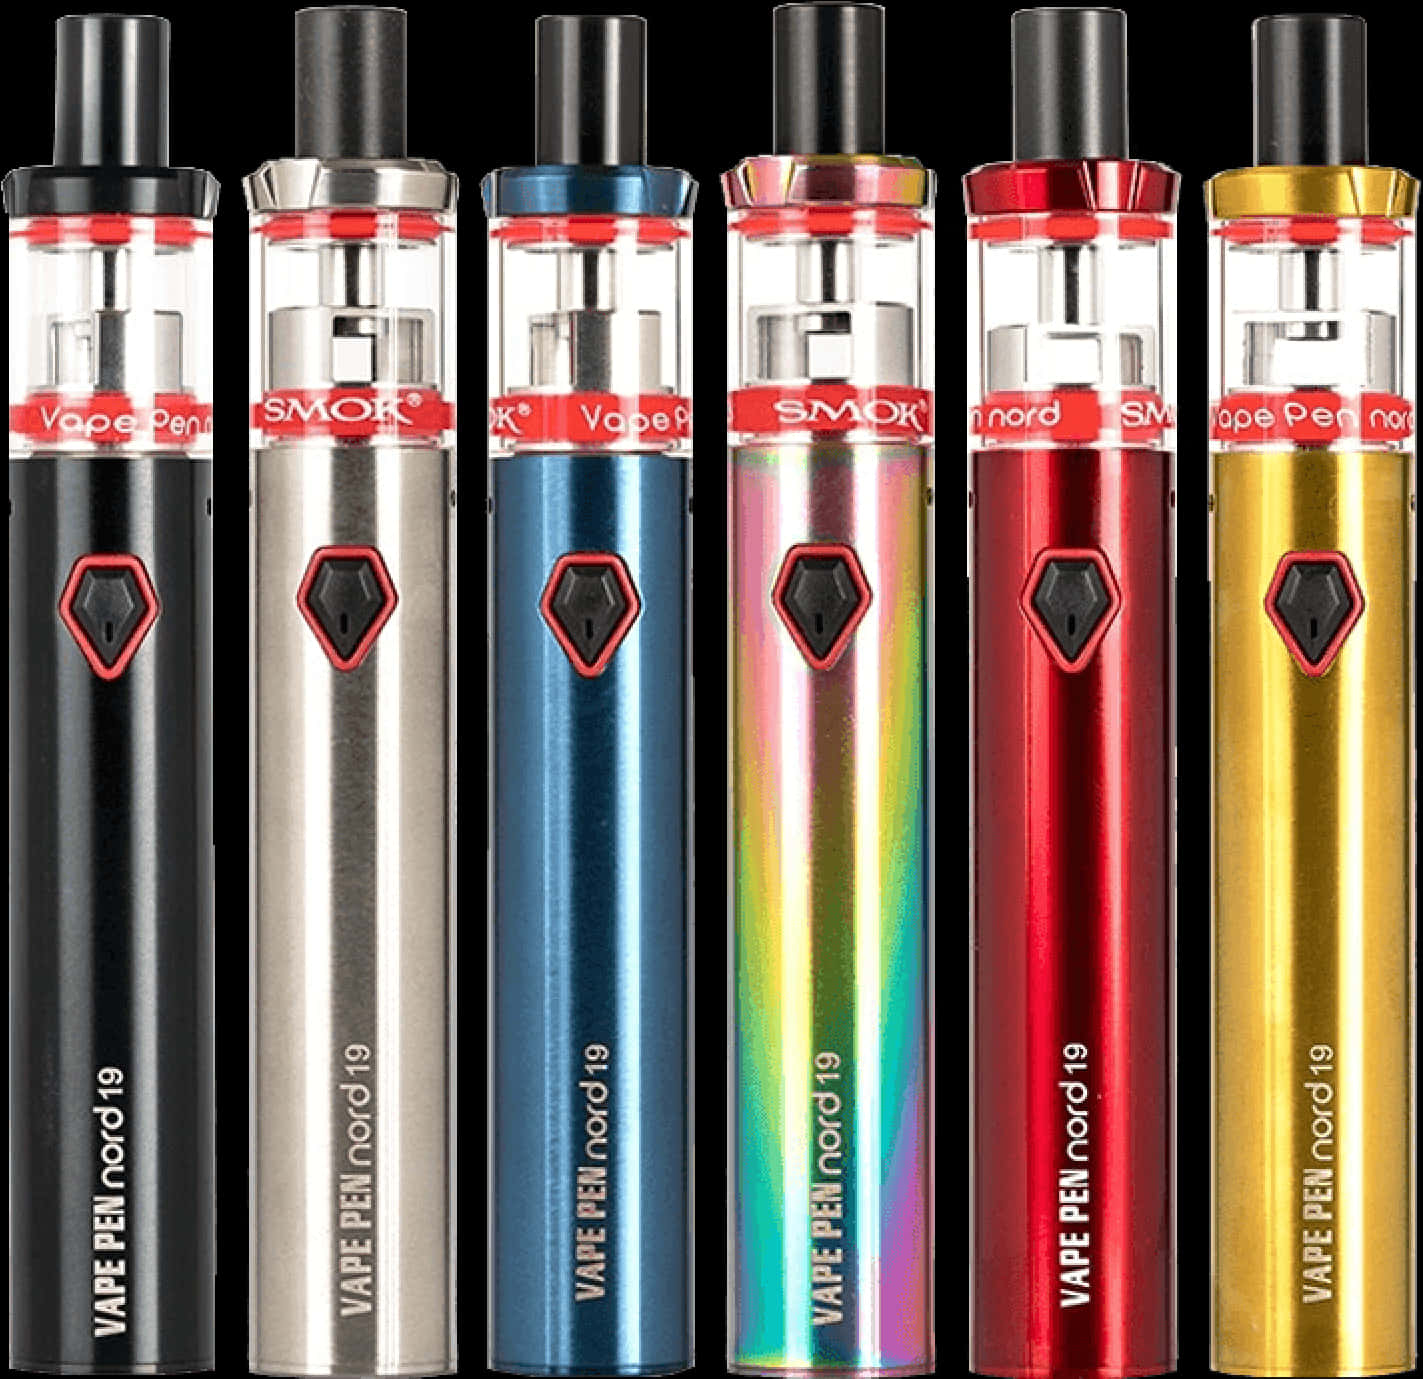 A Group Of Different Colored Electronic Cigarettes